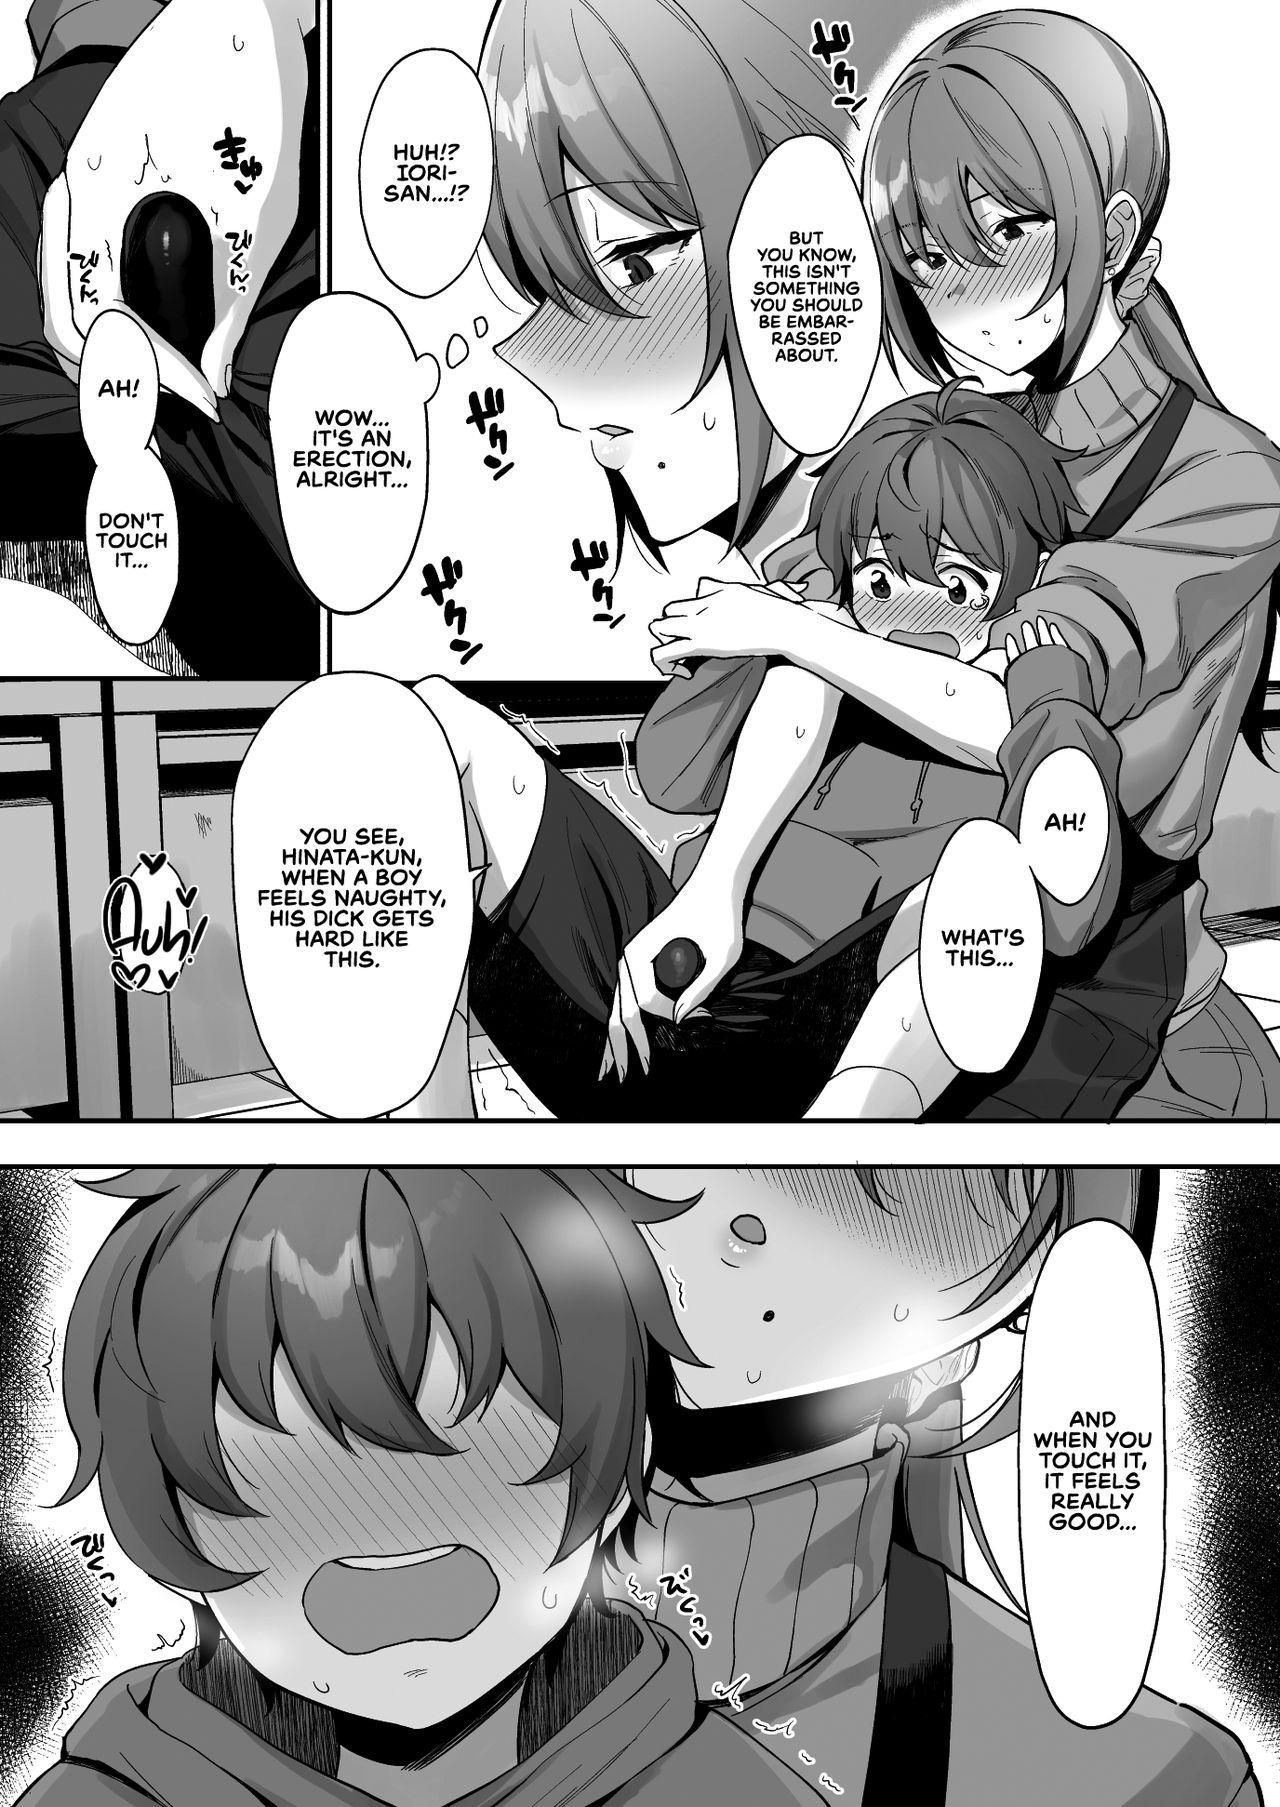 Slut Furuhonya no Onee-san to | With The Lady From The Used Book Shop - Original Letsdoeit - Page 10